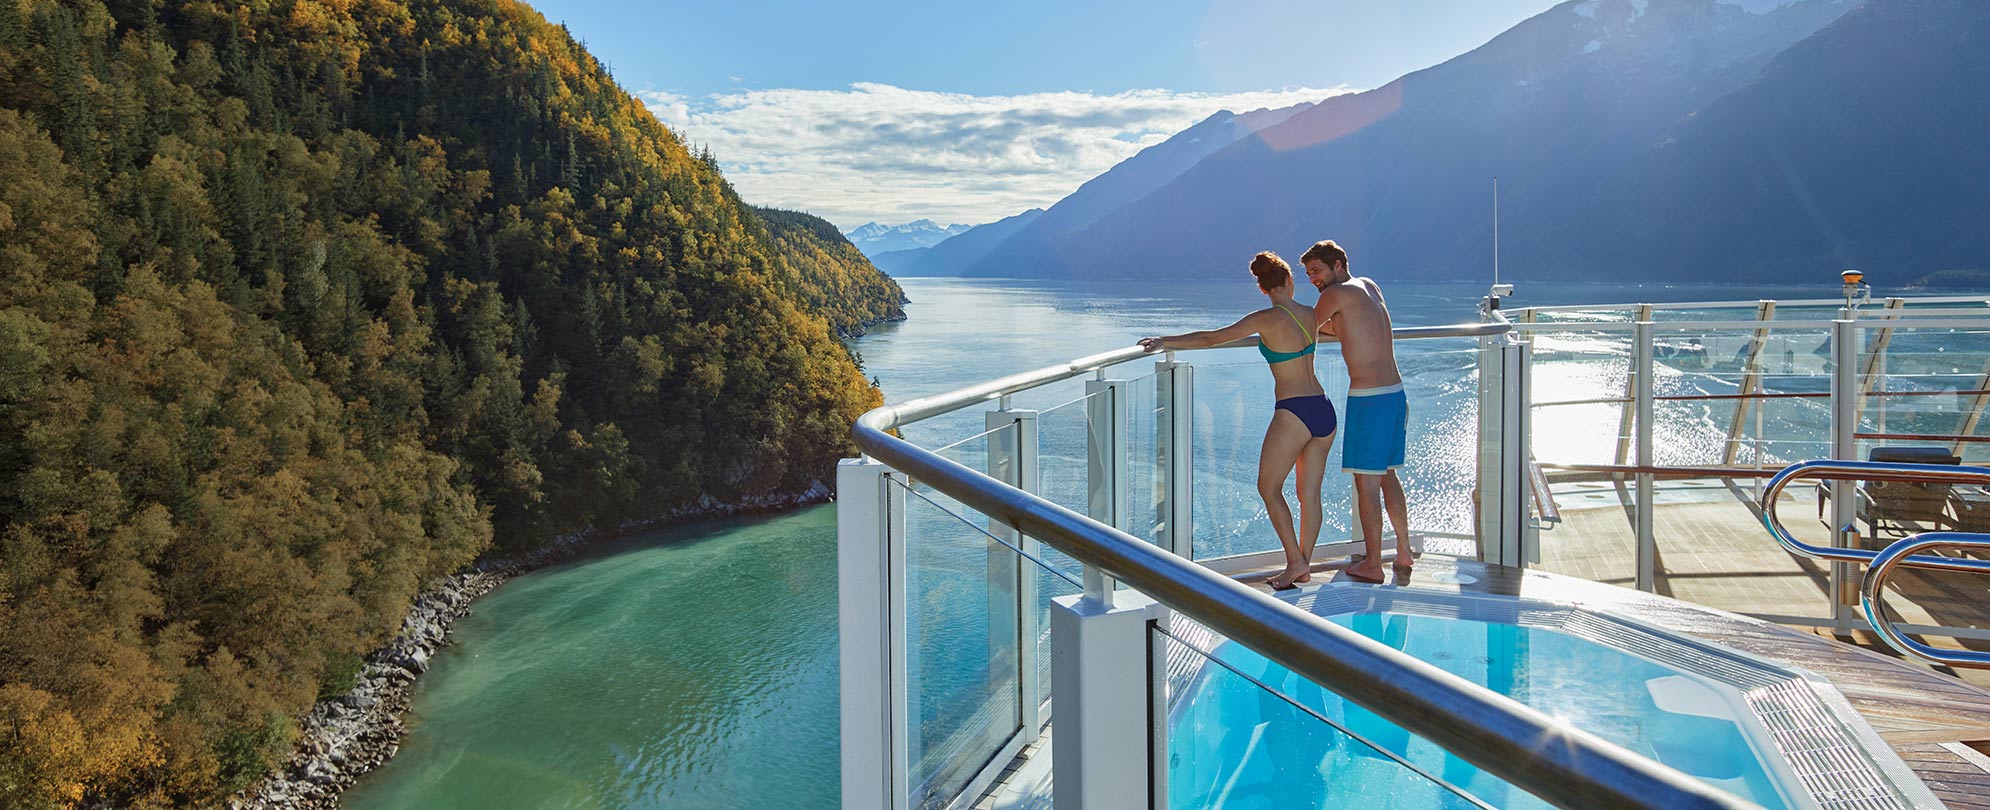 Couple leaning against balcony railing while overlooking a lake and Mountains in the Norwegian Cruise.